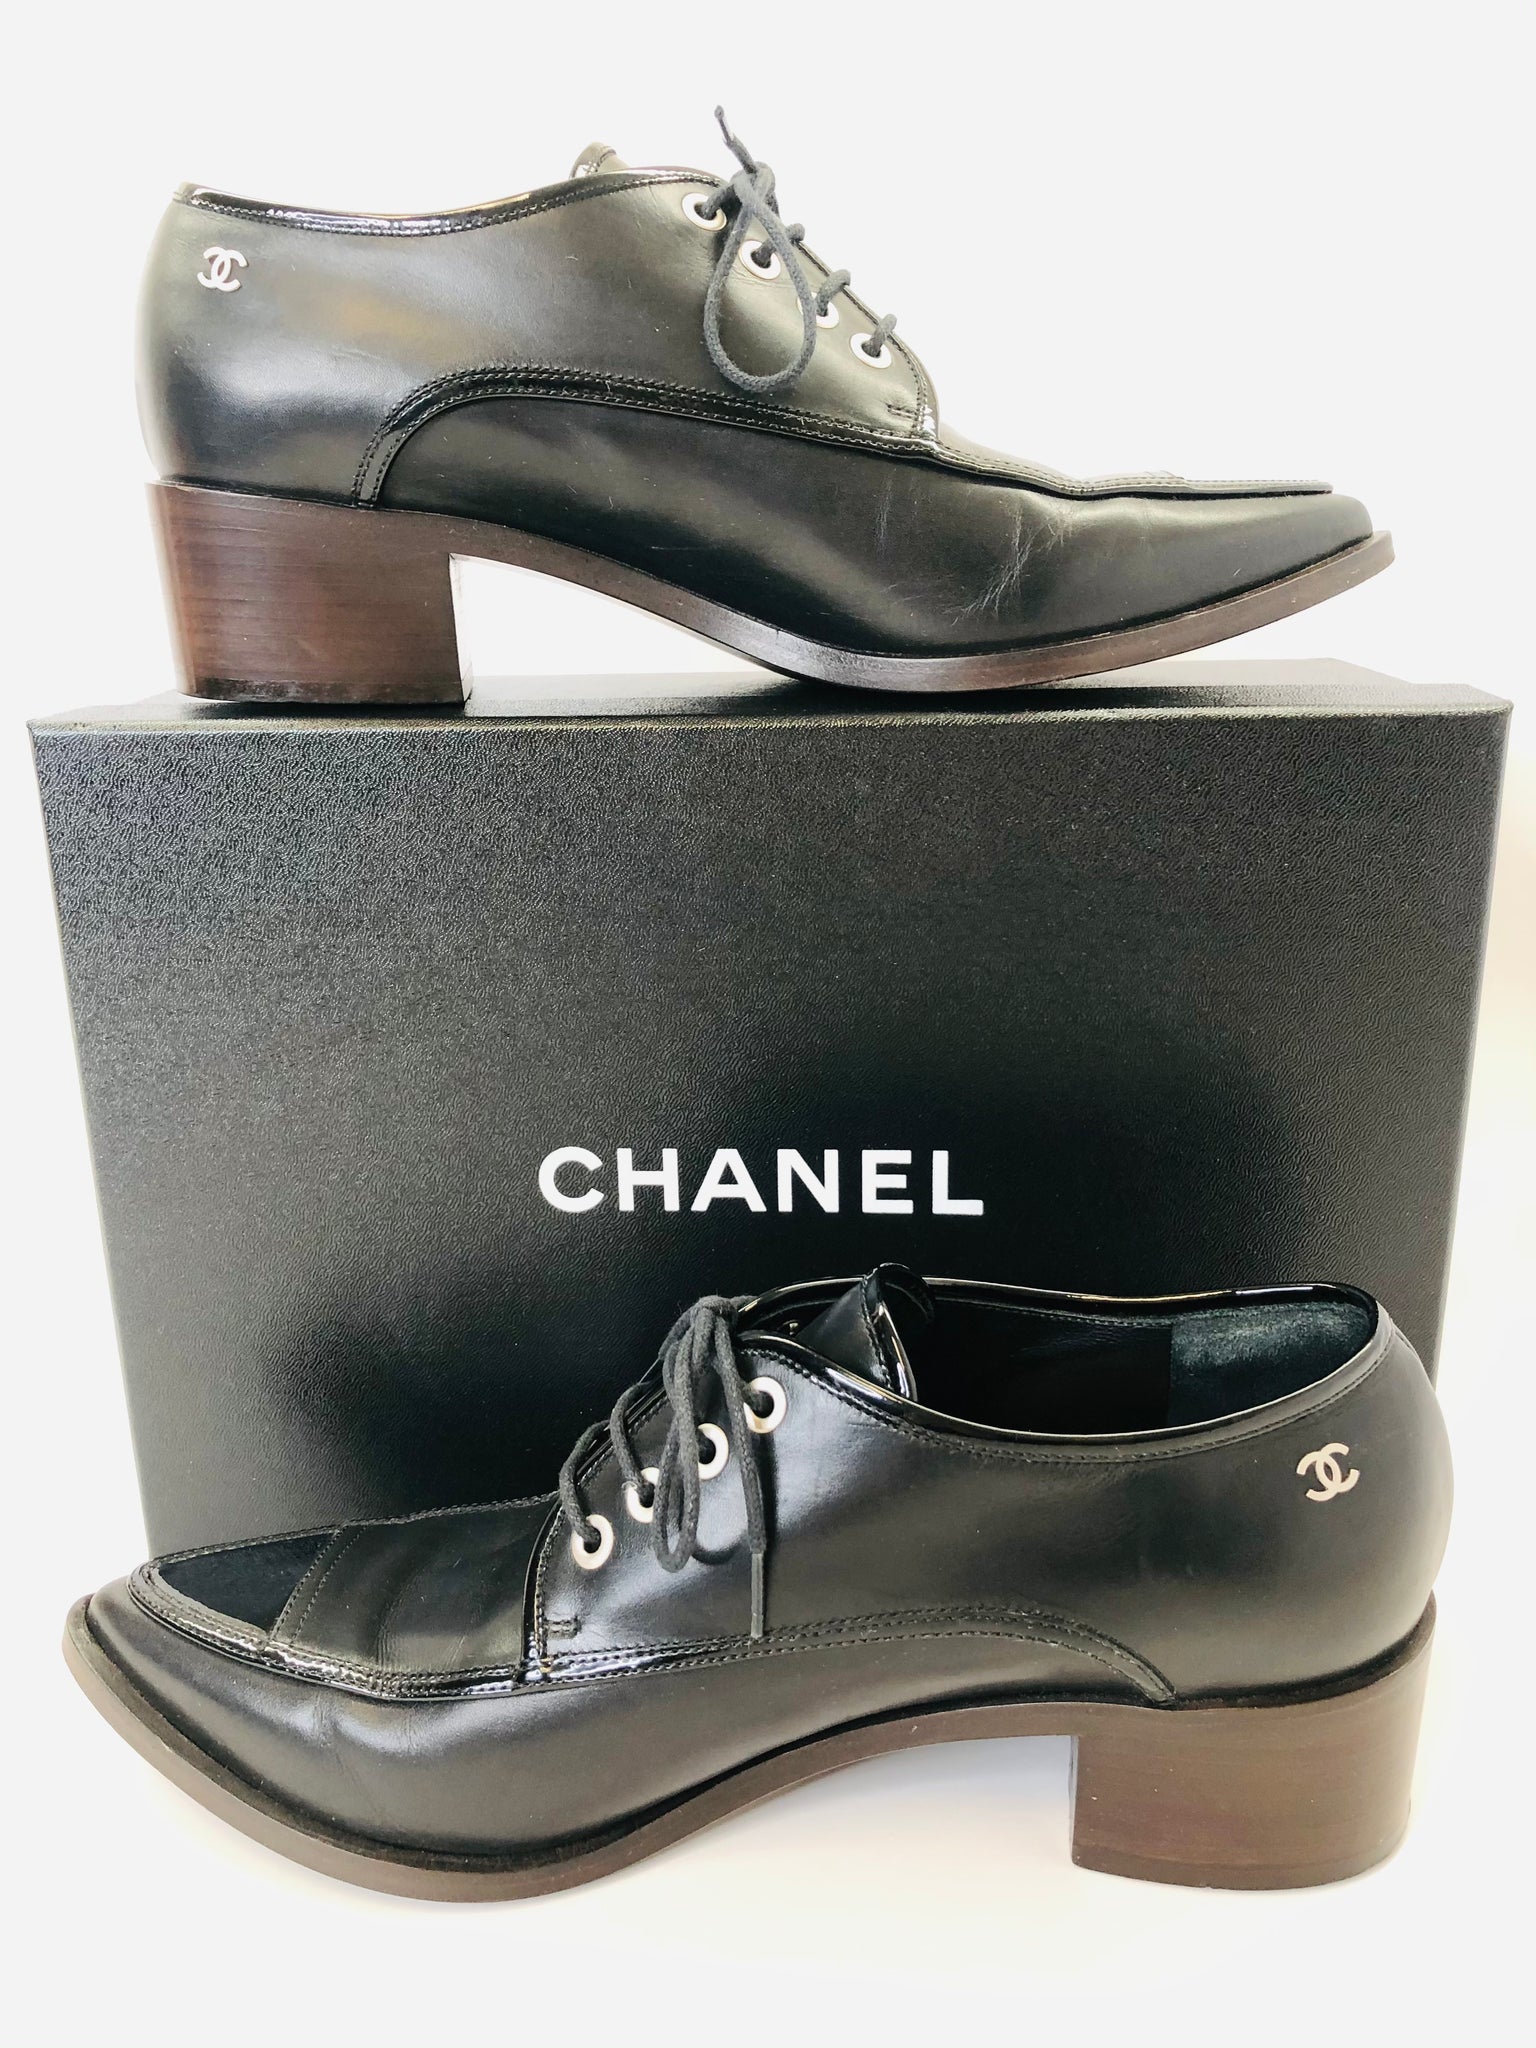 chanel patent leather shoes